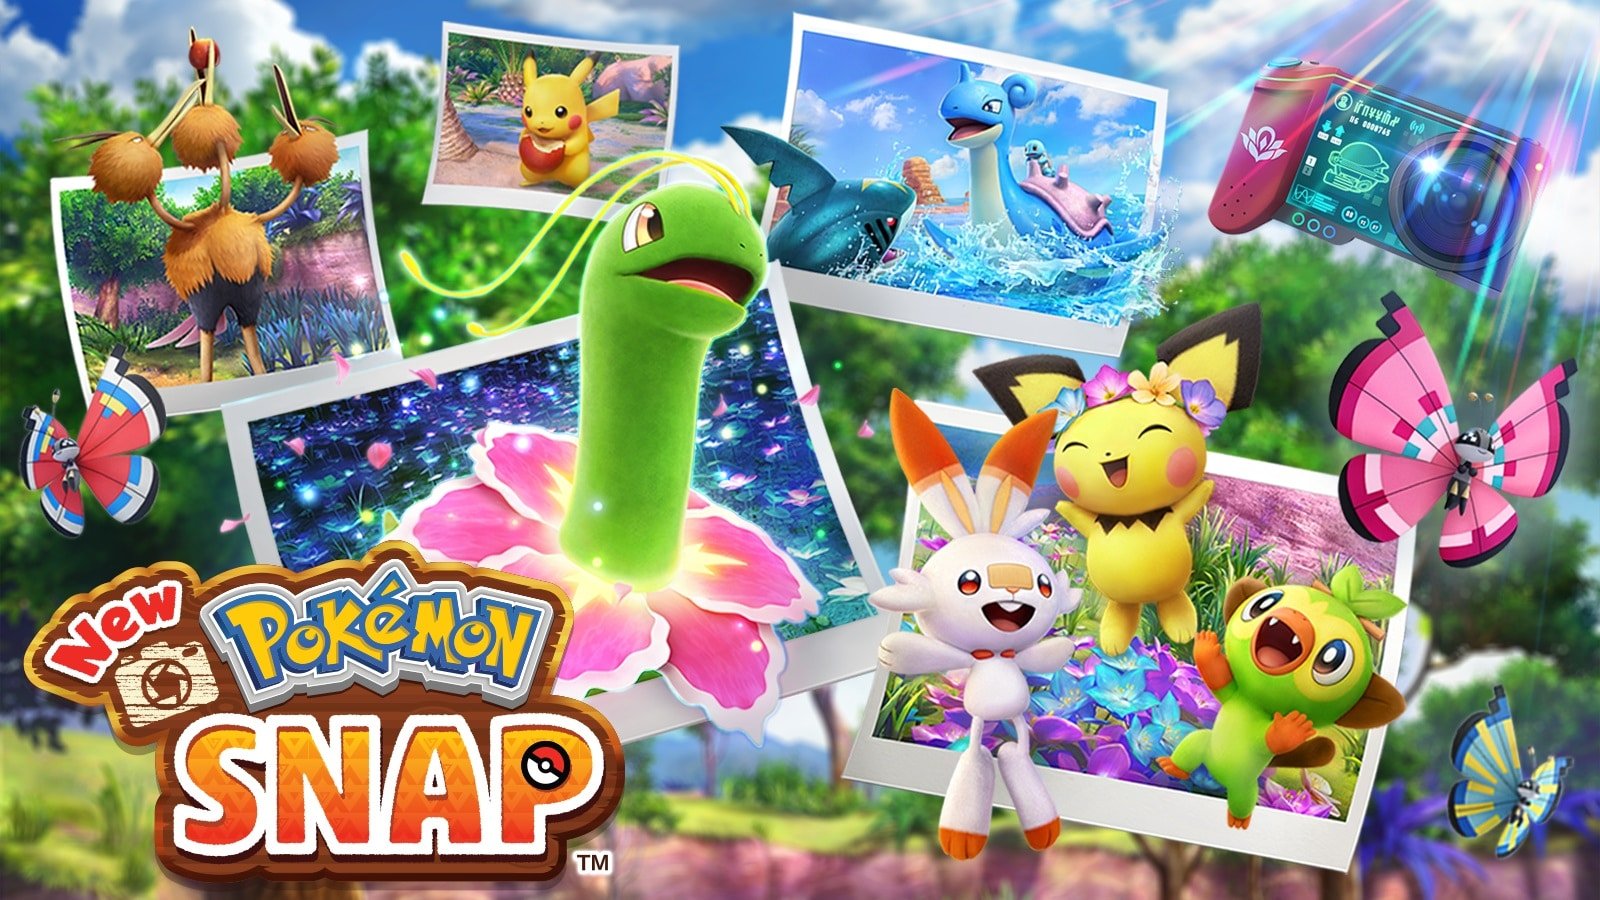 The main premise of New Pokemon Snap was experimented with